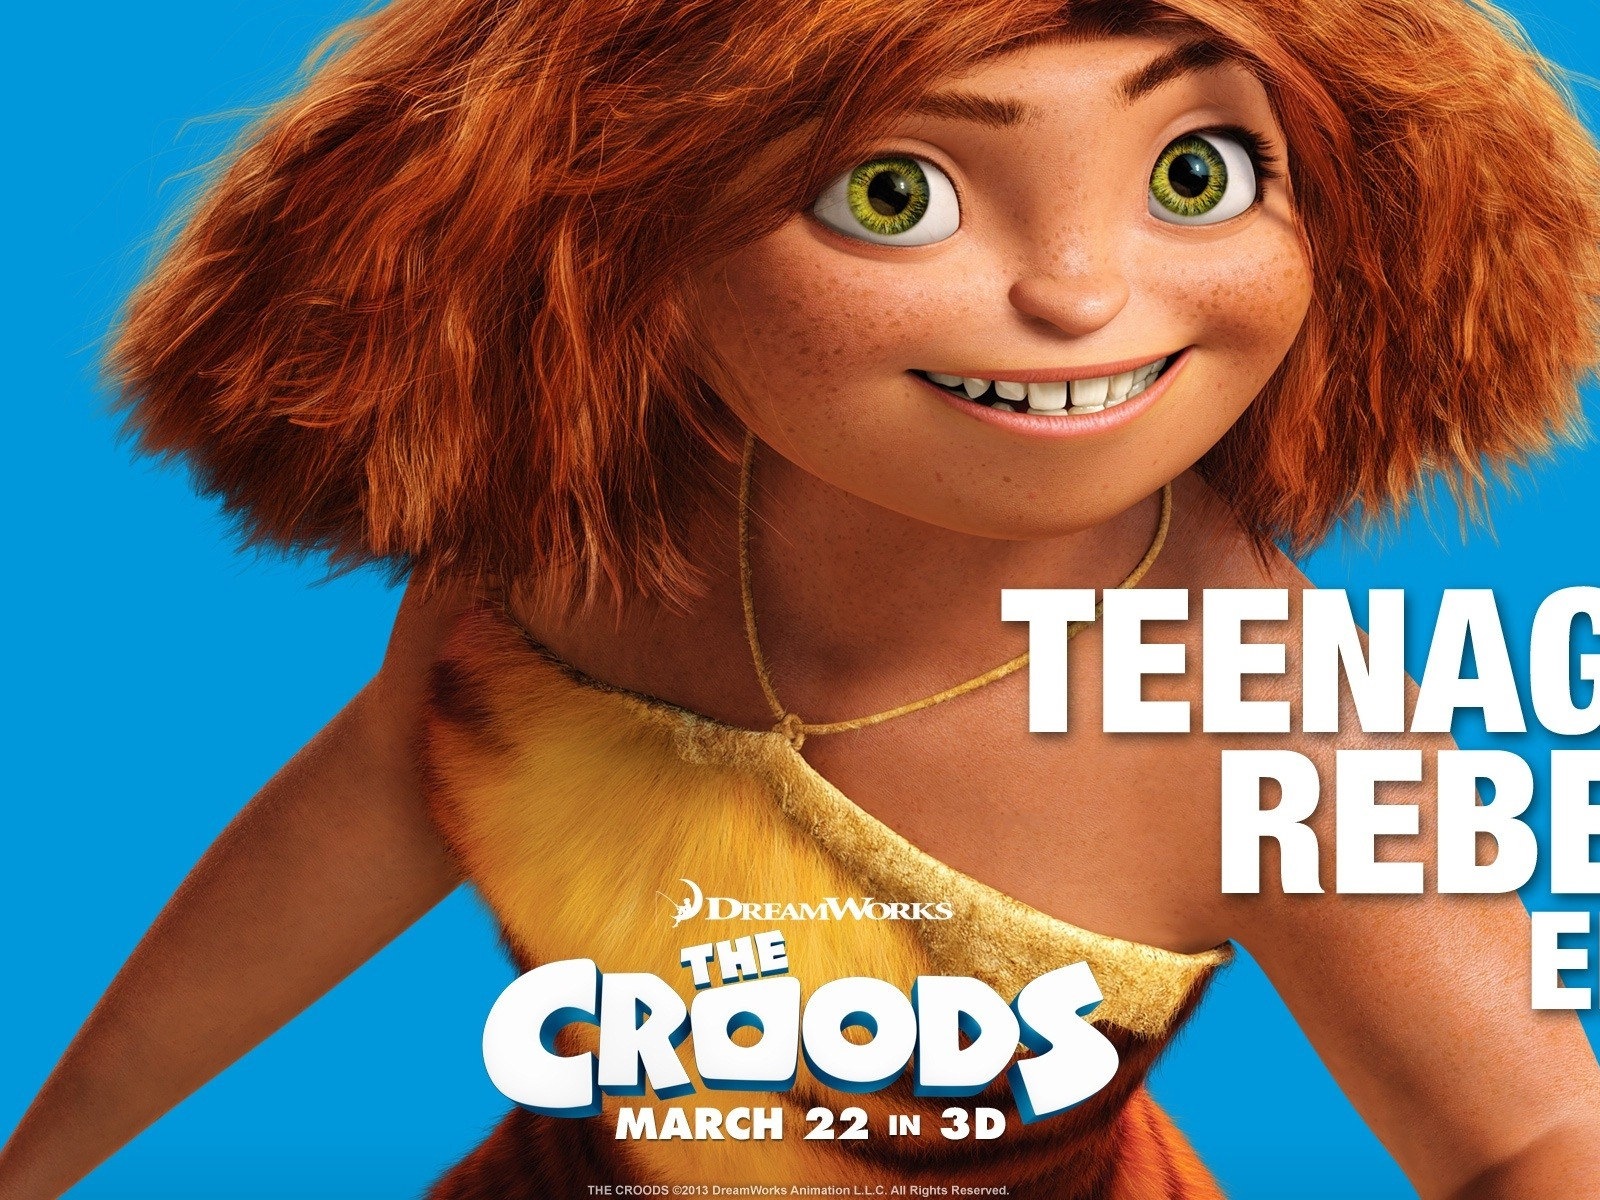 The Croods HD movie wallpapers #10 - 1600x1200